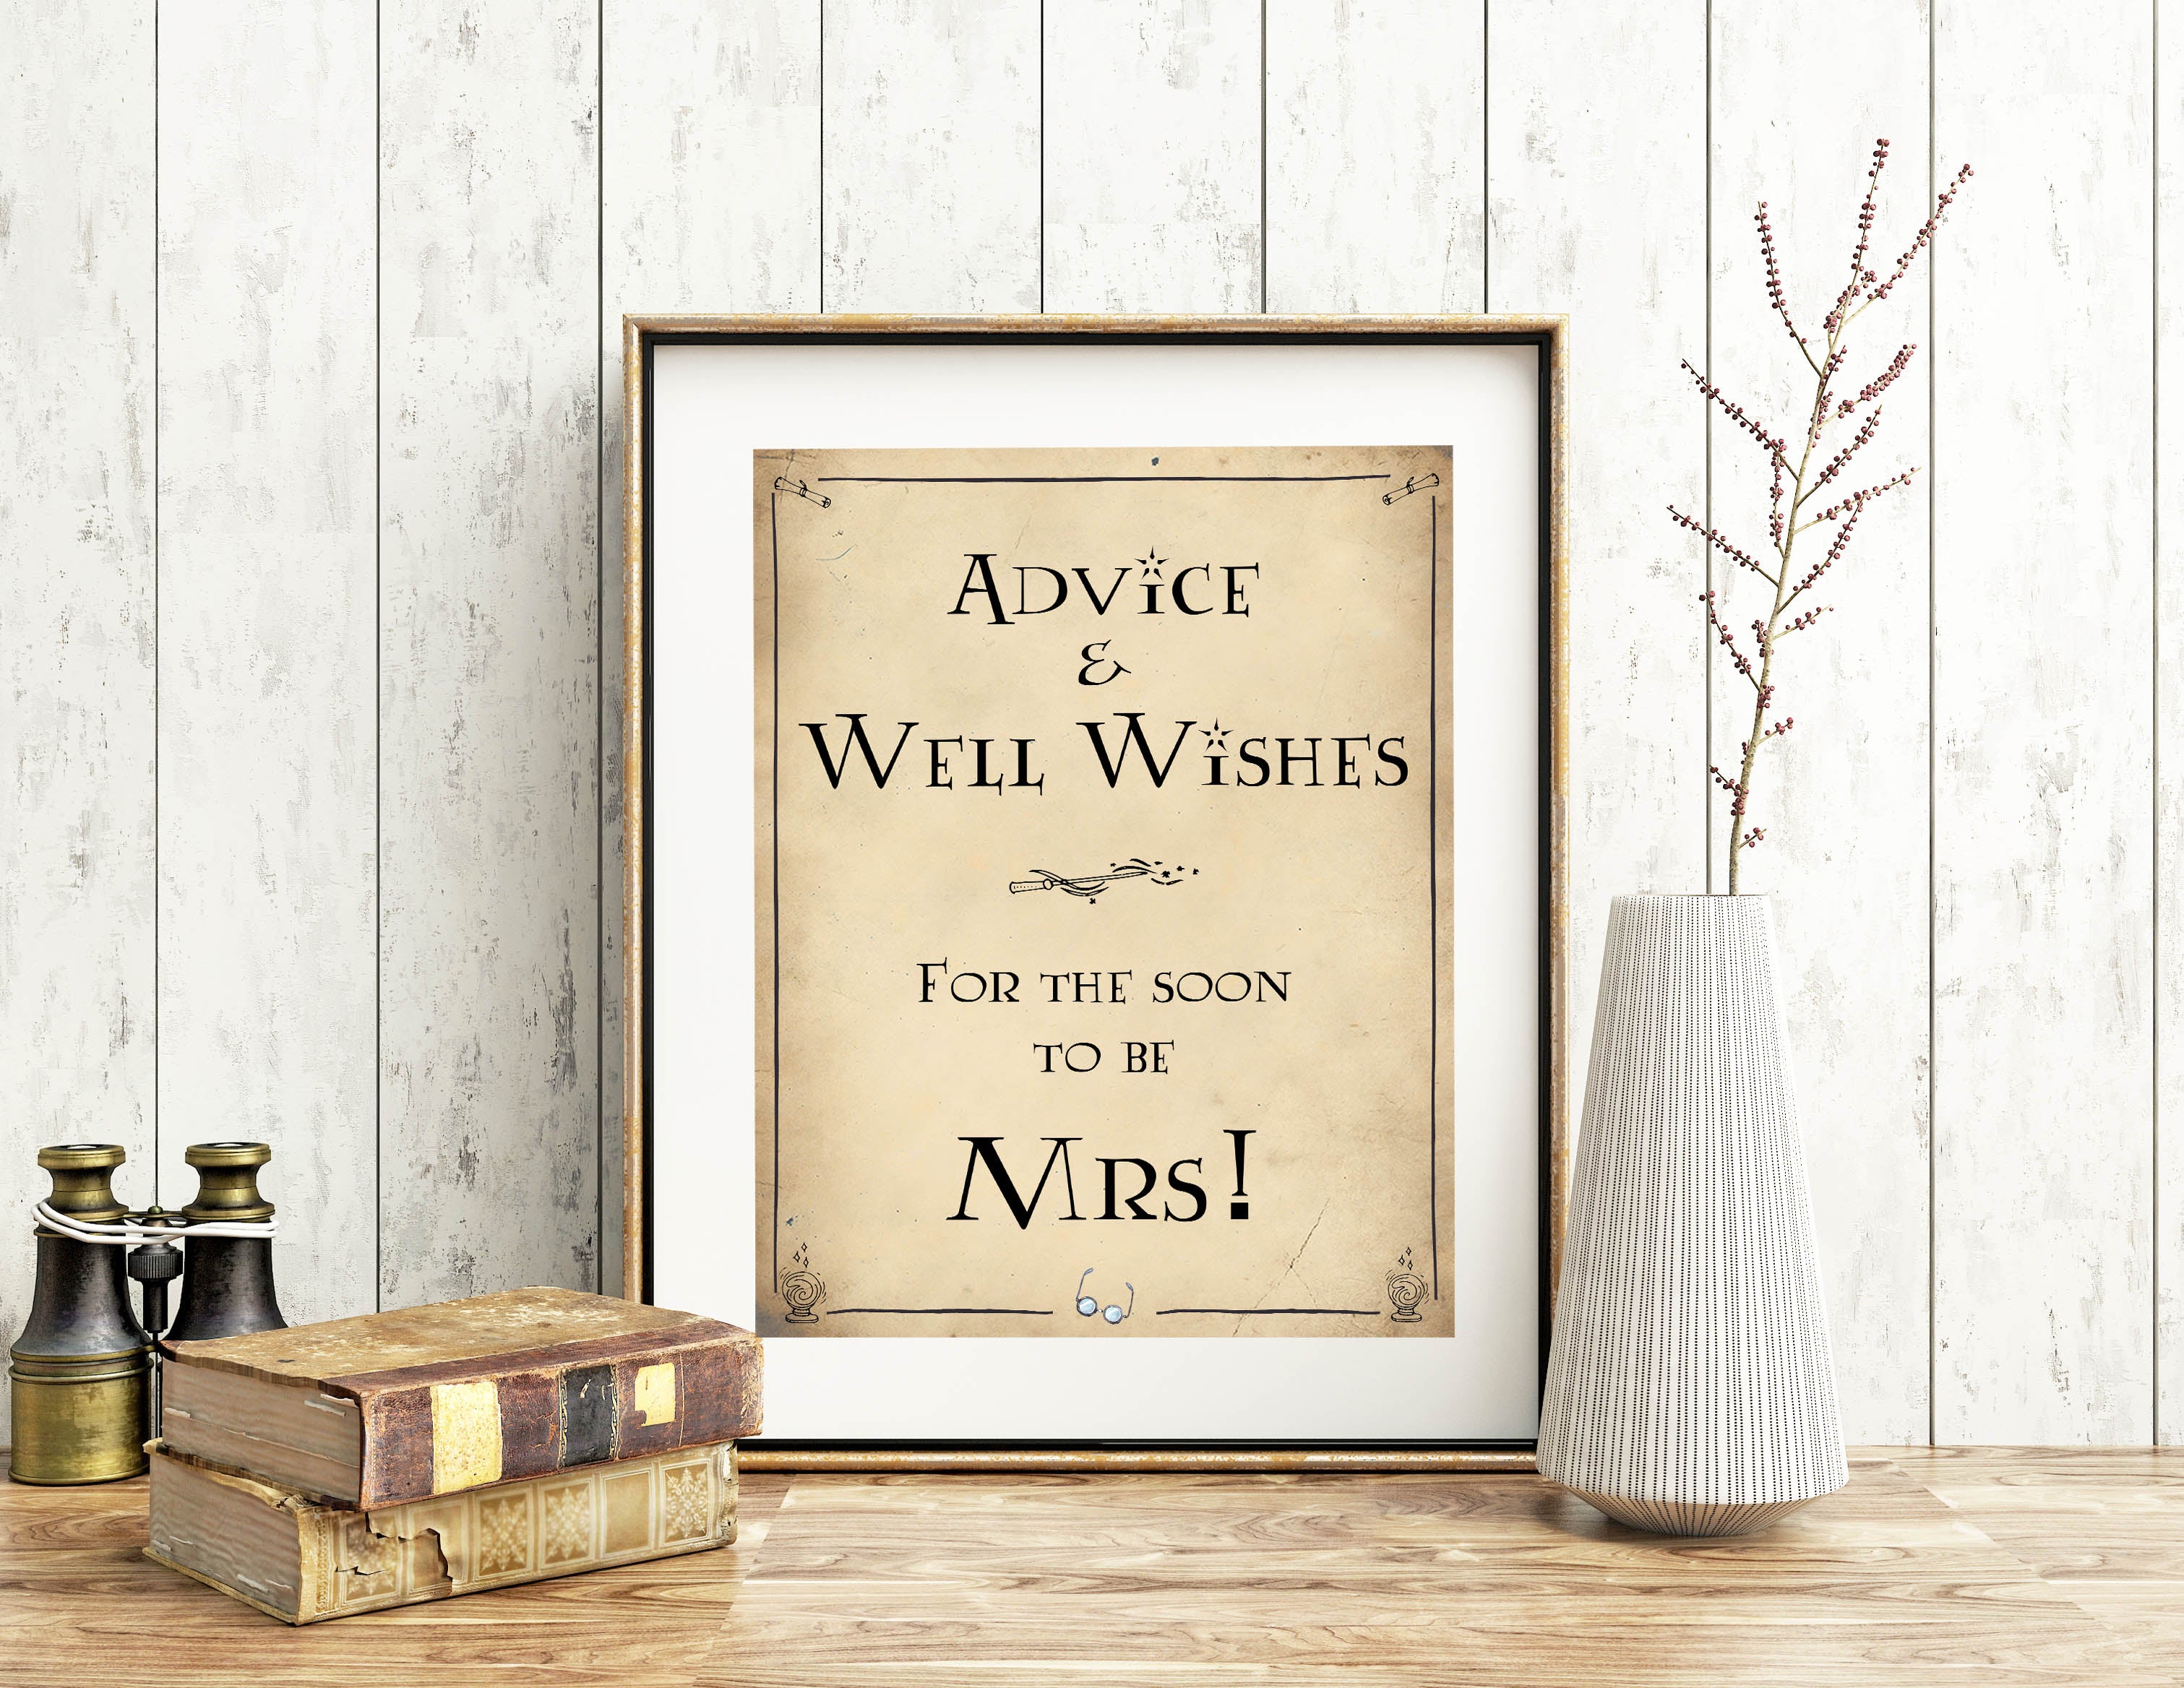 advice and well wishes for the bride, Printable bridal shower signs, Harry Potter bridal shower decor, Harry Potter bridal shower decor ideas, fun bridal shower decor, bridal shower game ideas, Harry Potter bridal shower ideas